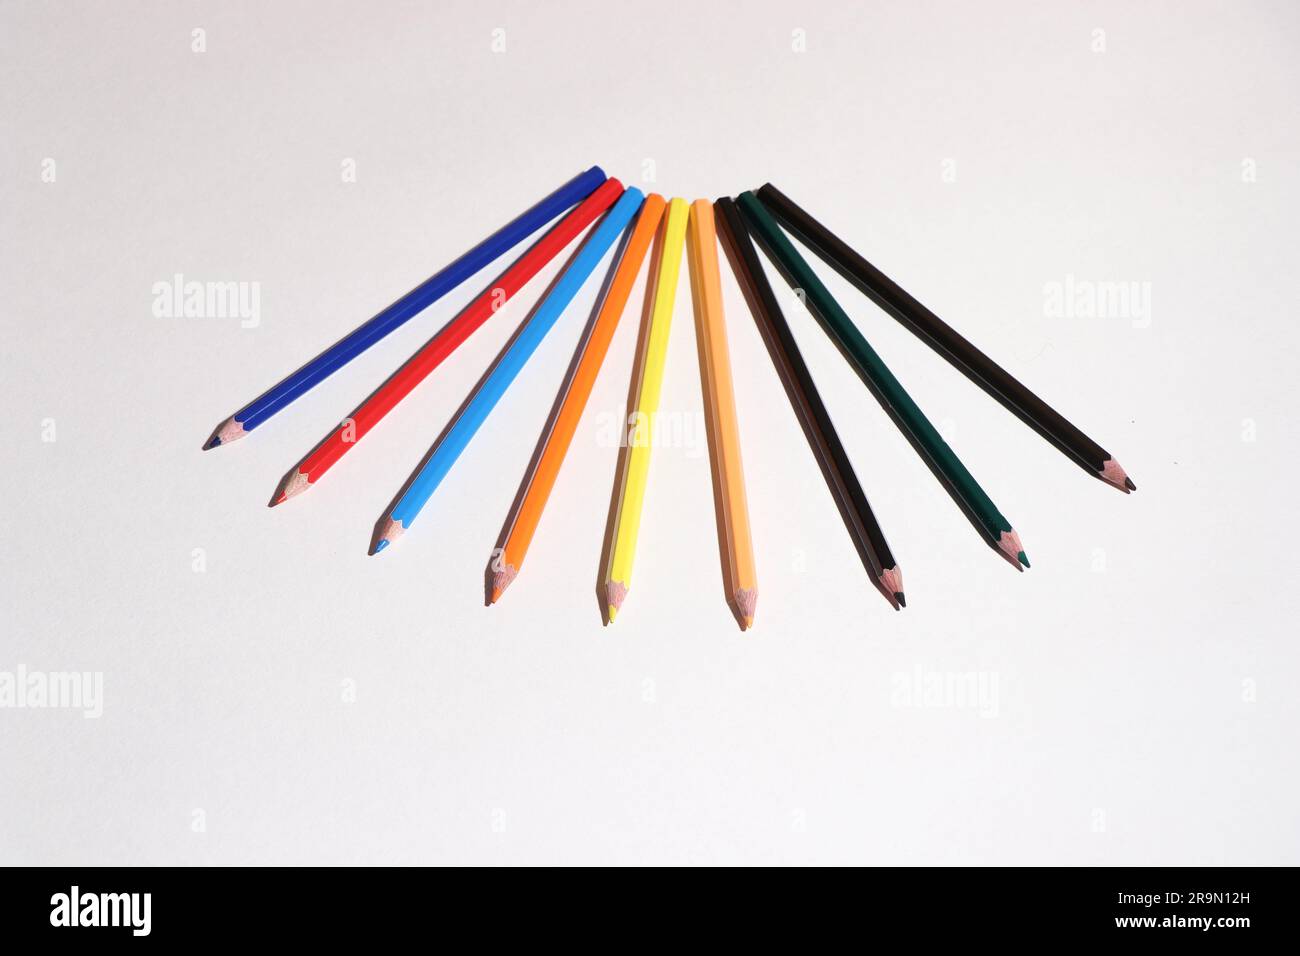 https://c8.alamy.com/comp/2R9N12H/vibrant-inspiration-unleashed-explore-the-spectrum-of-color-with-our-multi-colored-pencils-and-sharpener-stock-image!-2R9N12H.jpg